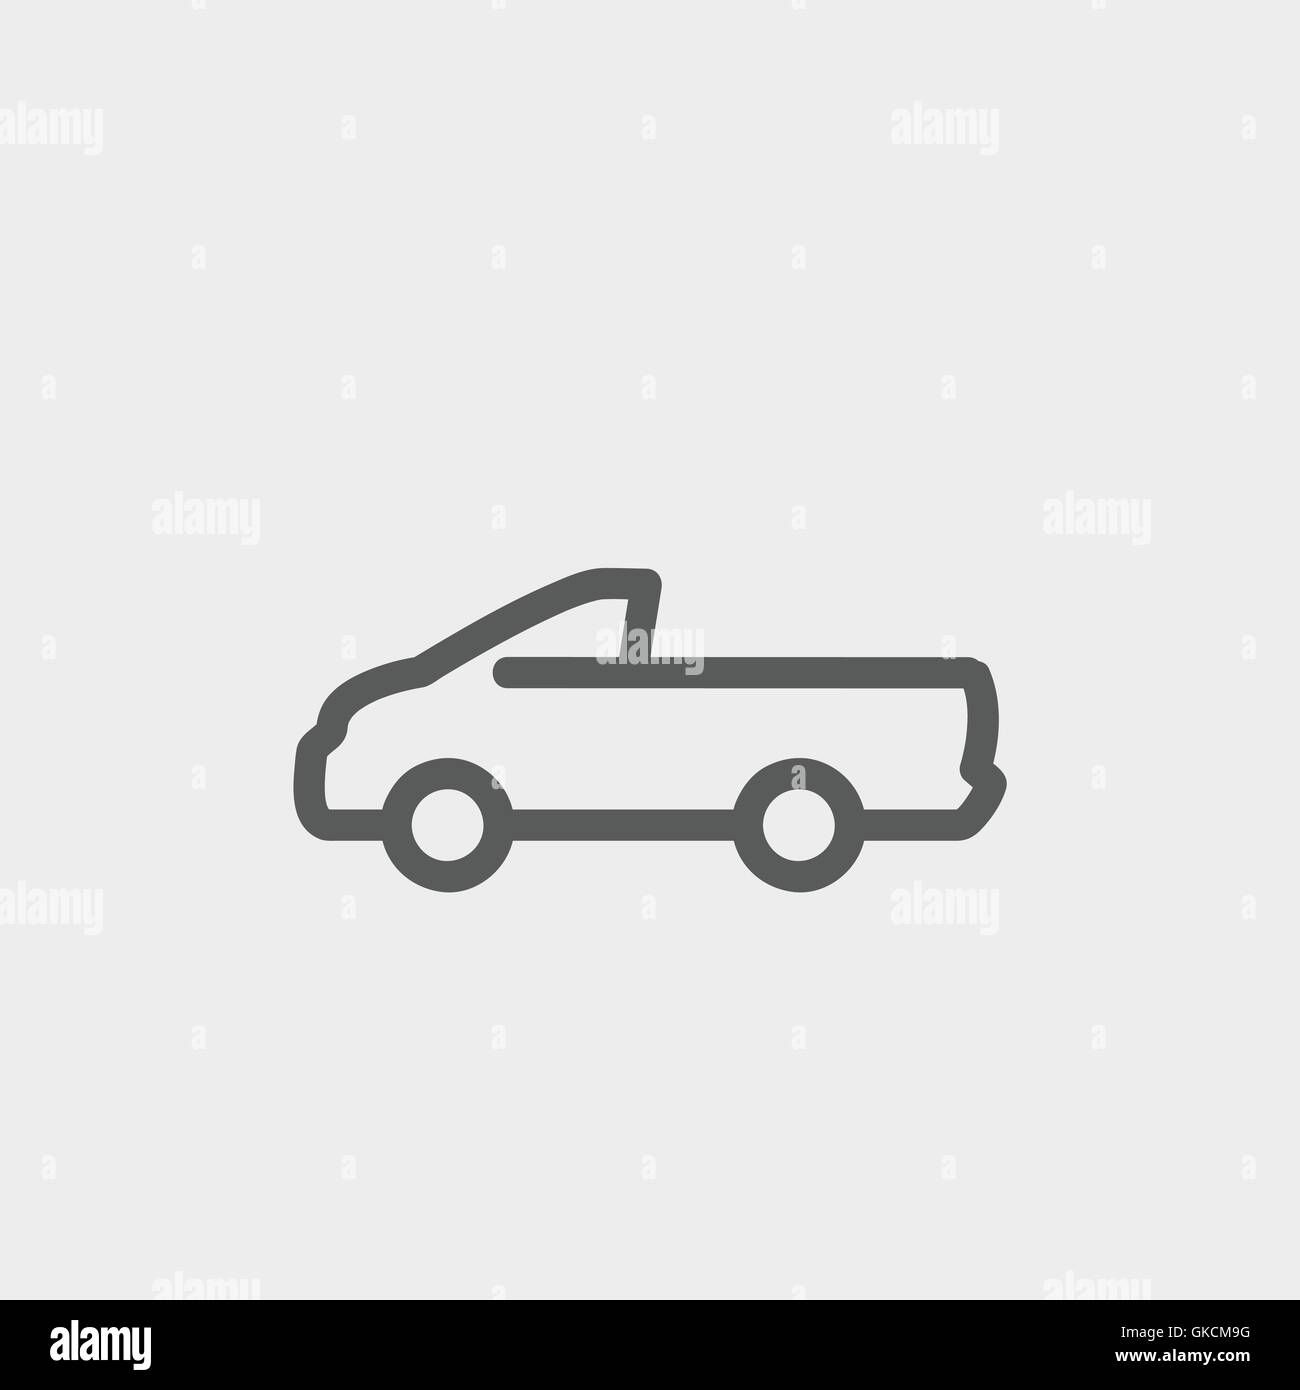 Pick-up truck thin line icon Stock Vector